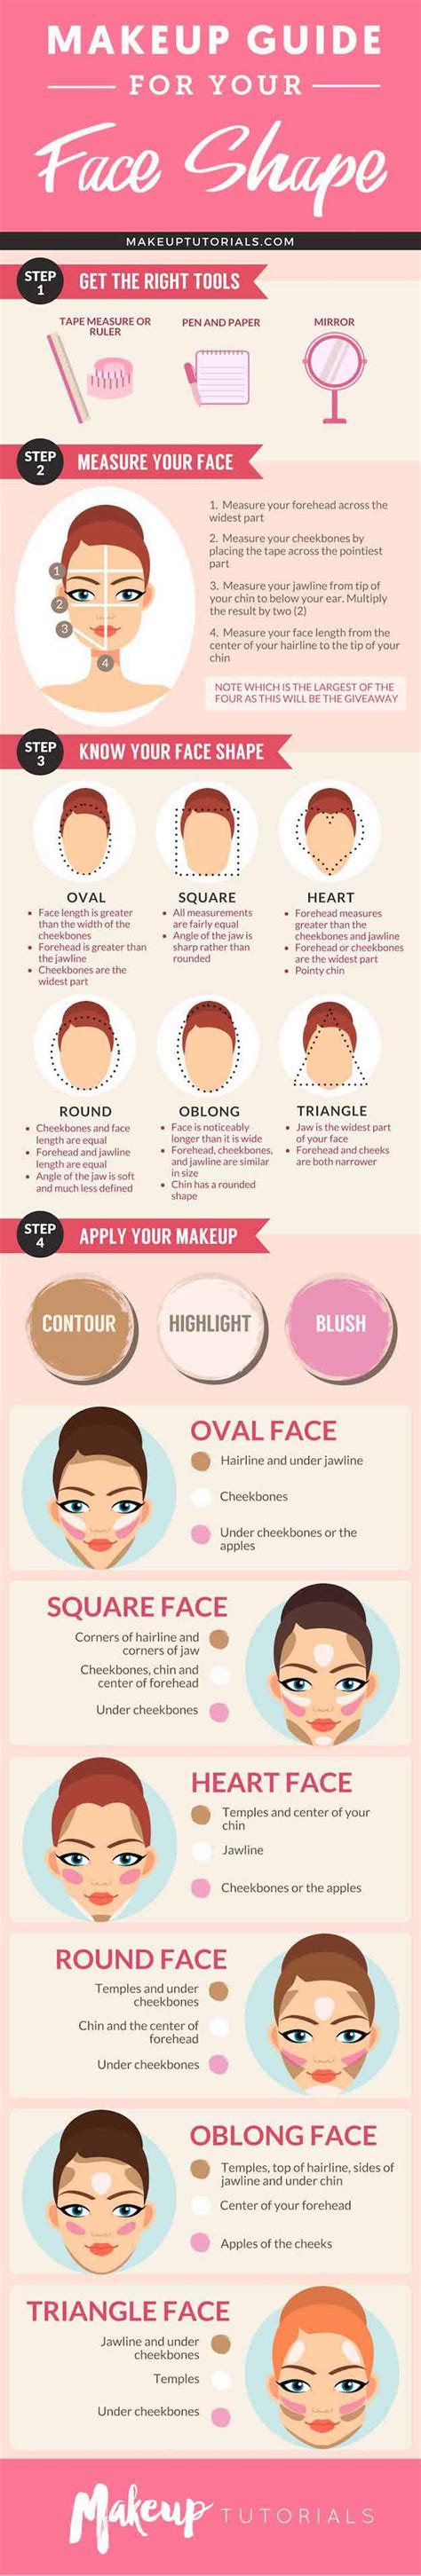 How To Apply Makeup Face Shape Tutorial Pics